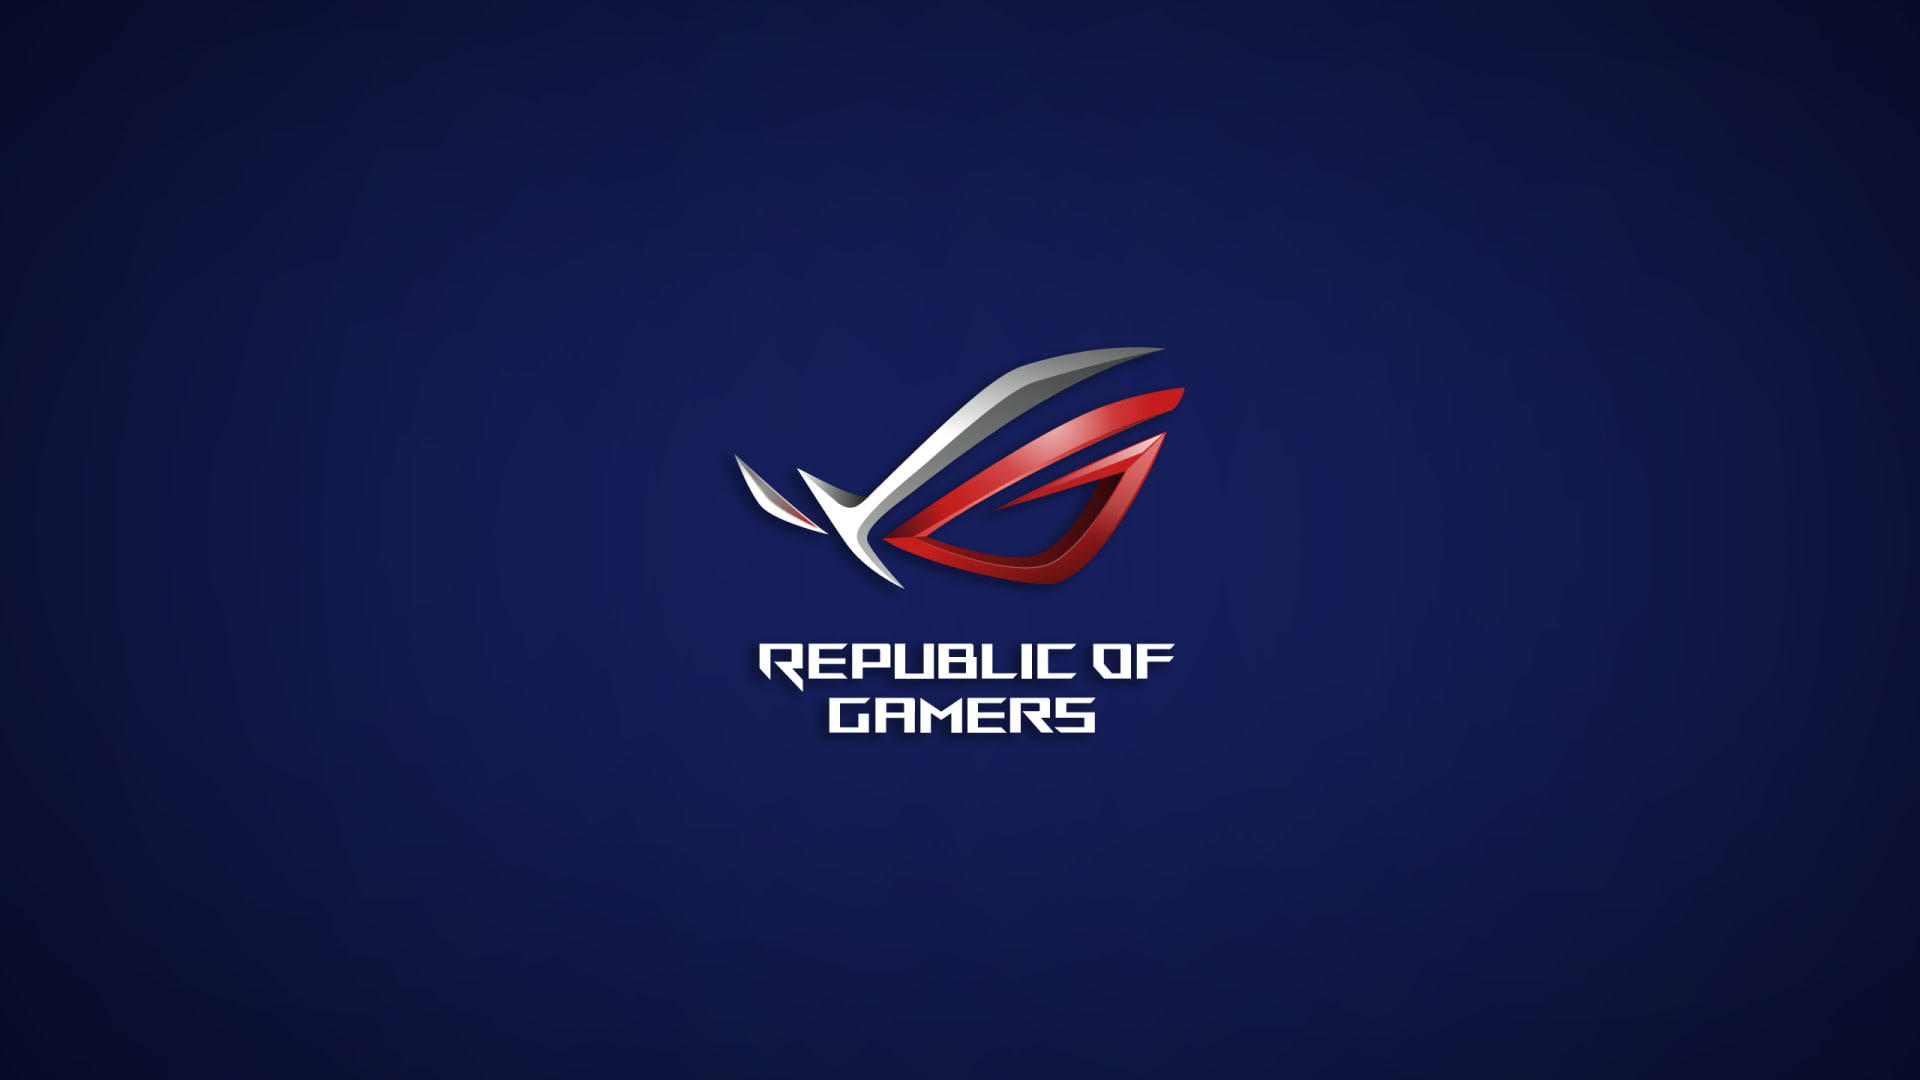 Technology, Asus ROG, Computer, Republic of Gamers, blue, communication